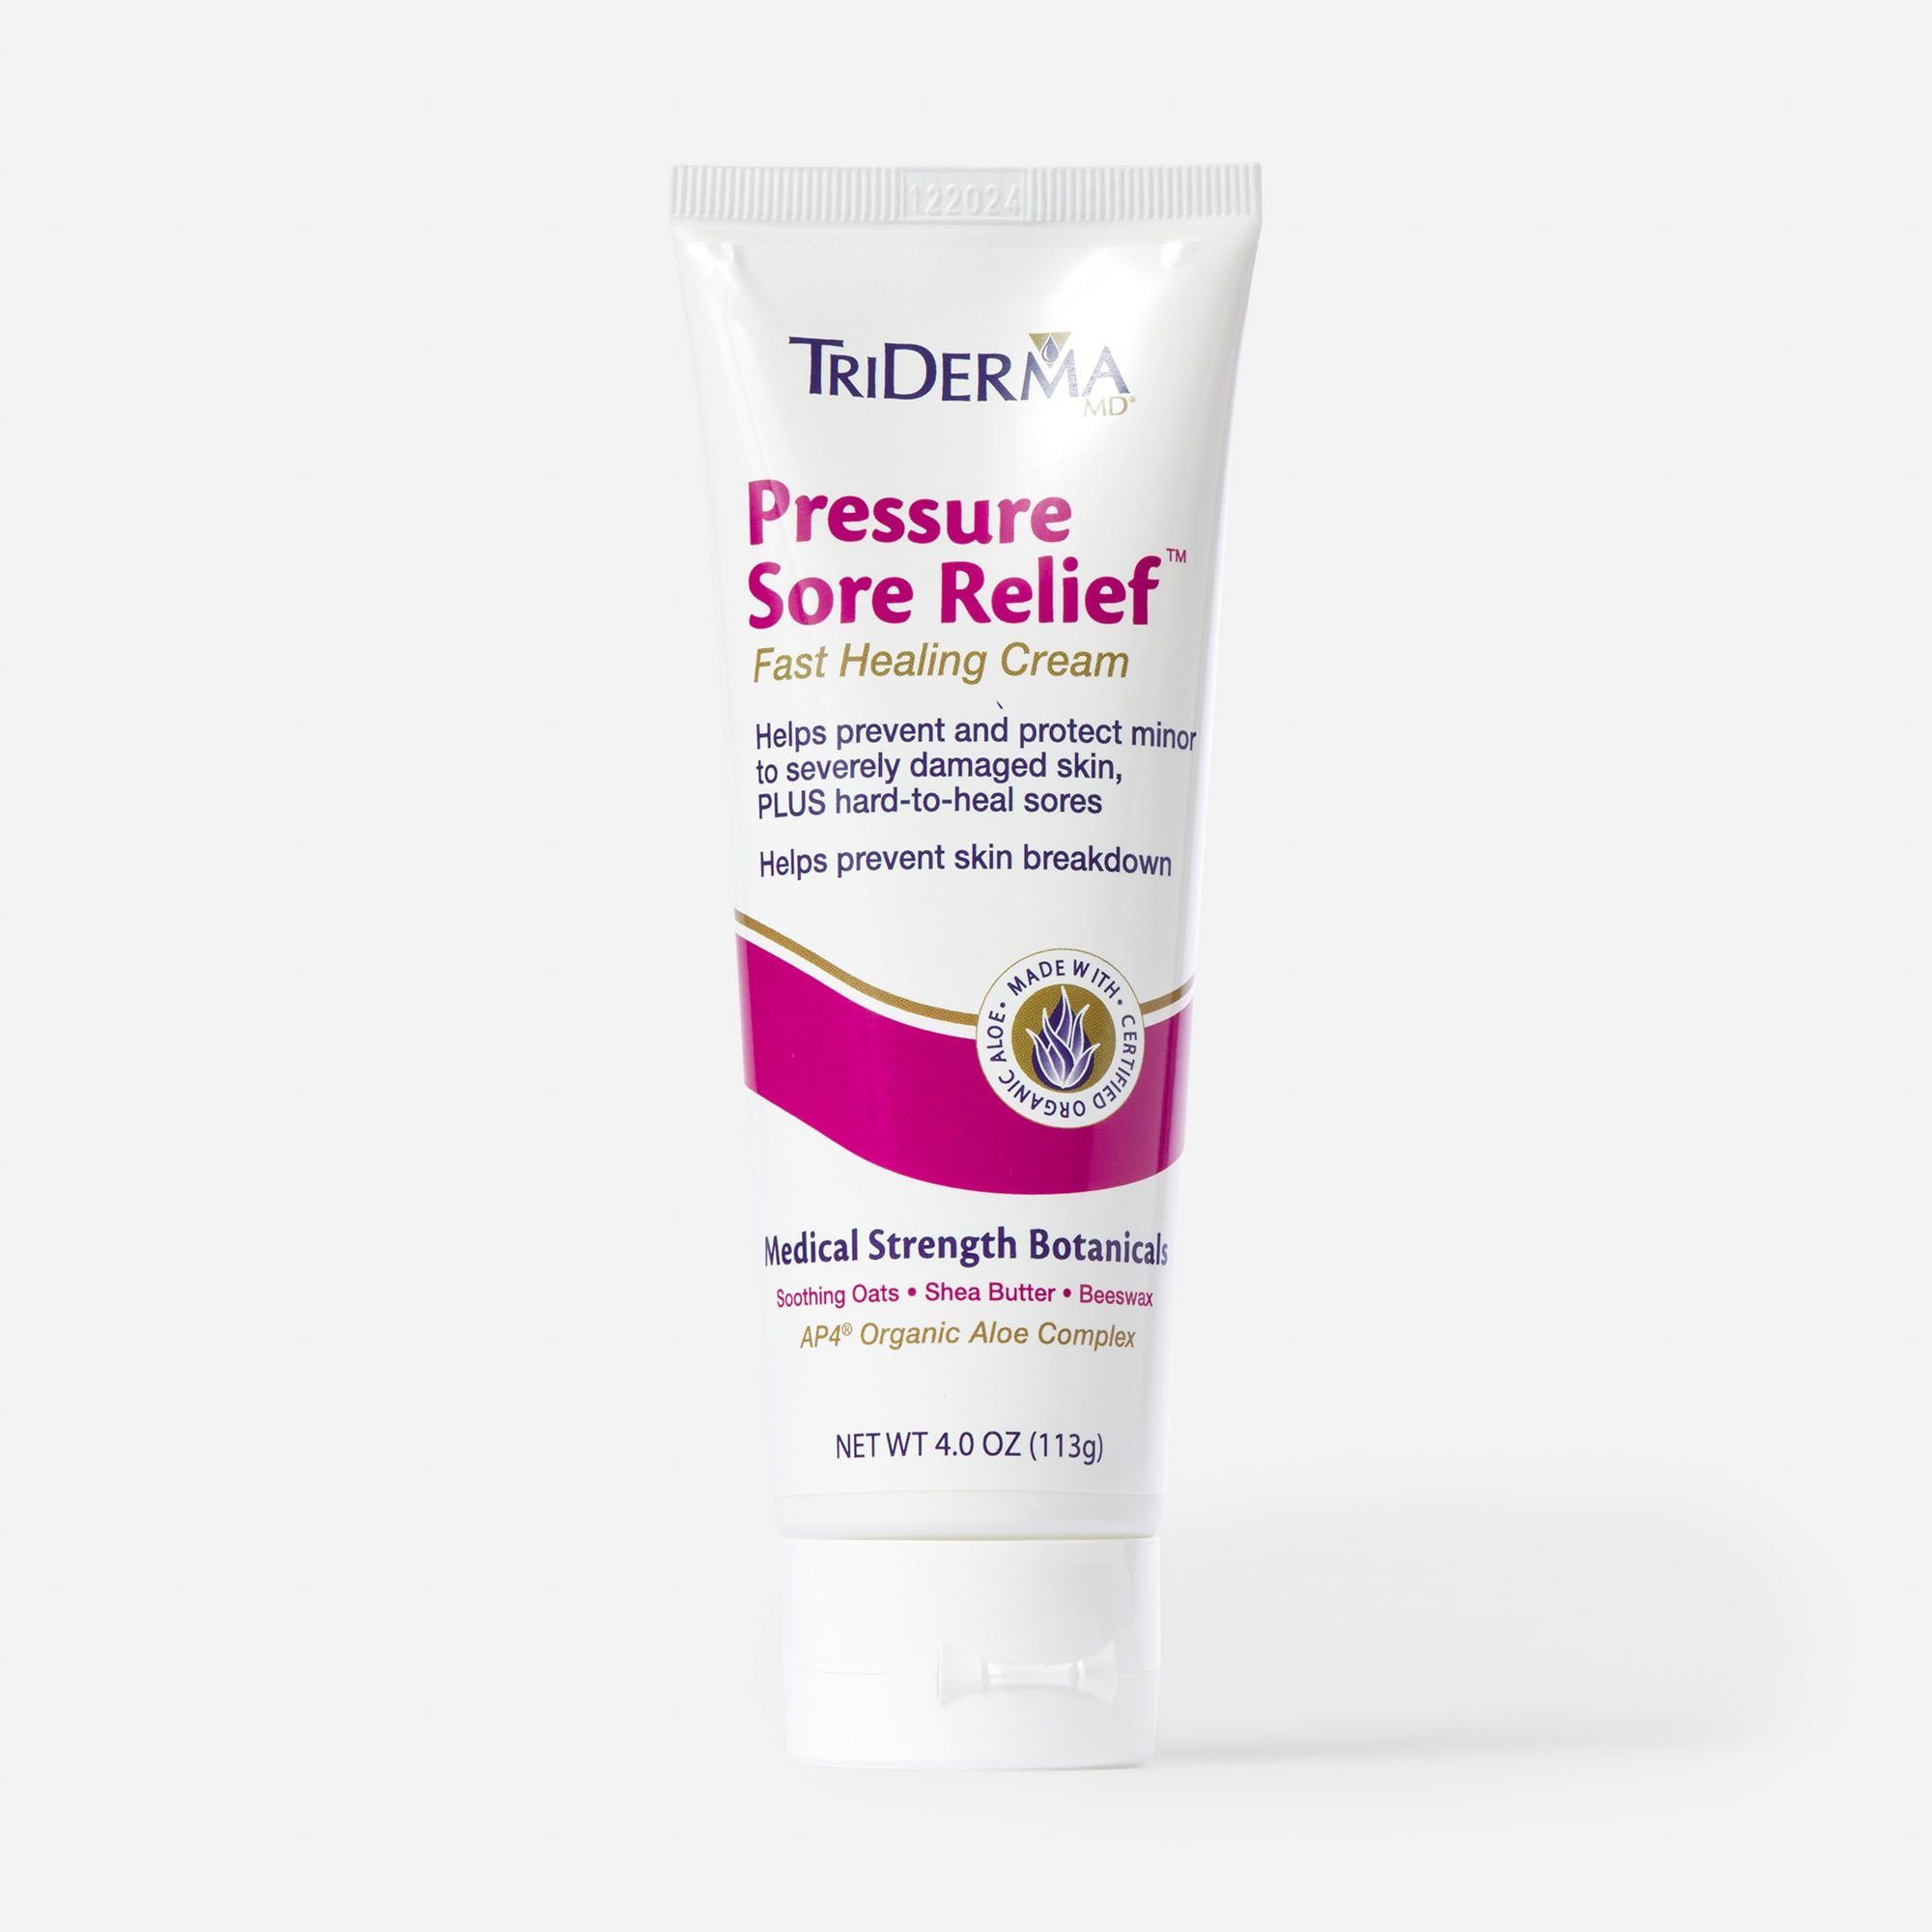 TriDerma Pressure Sore Relief Healing Cream for Wounds & Sores, 4 Ounce Jar  818926010283